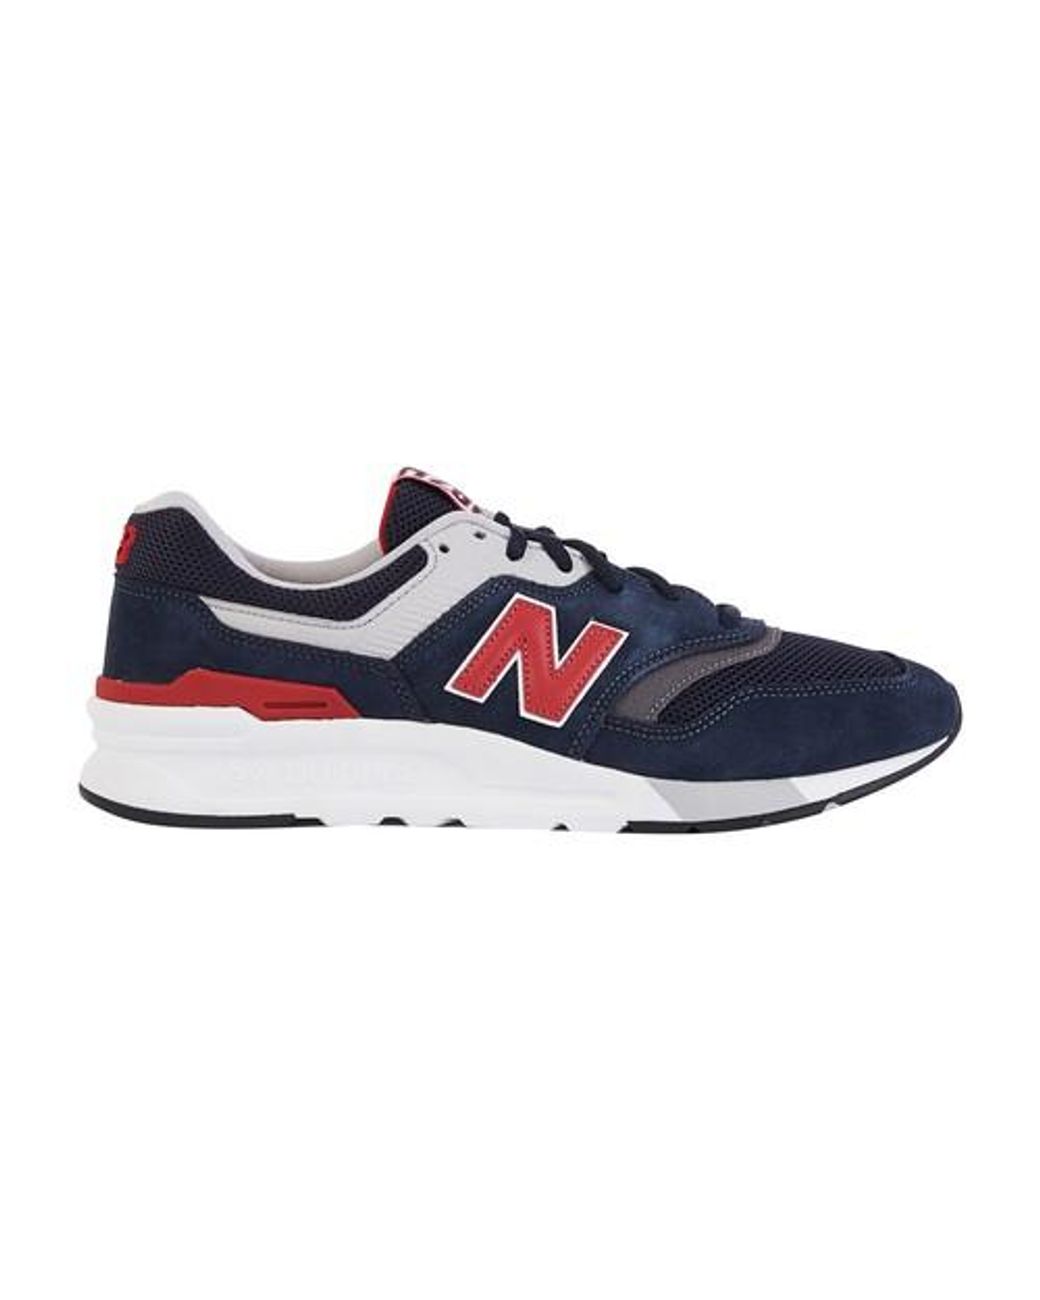 New Balance Leather 997 Trainers in Navy/Red (Blue) for Men - Save 45% ...